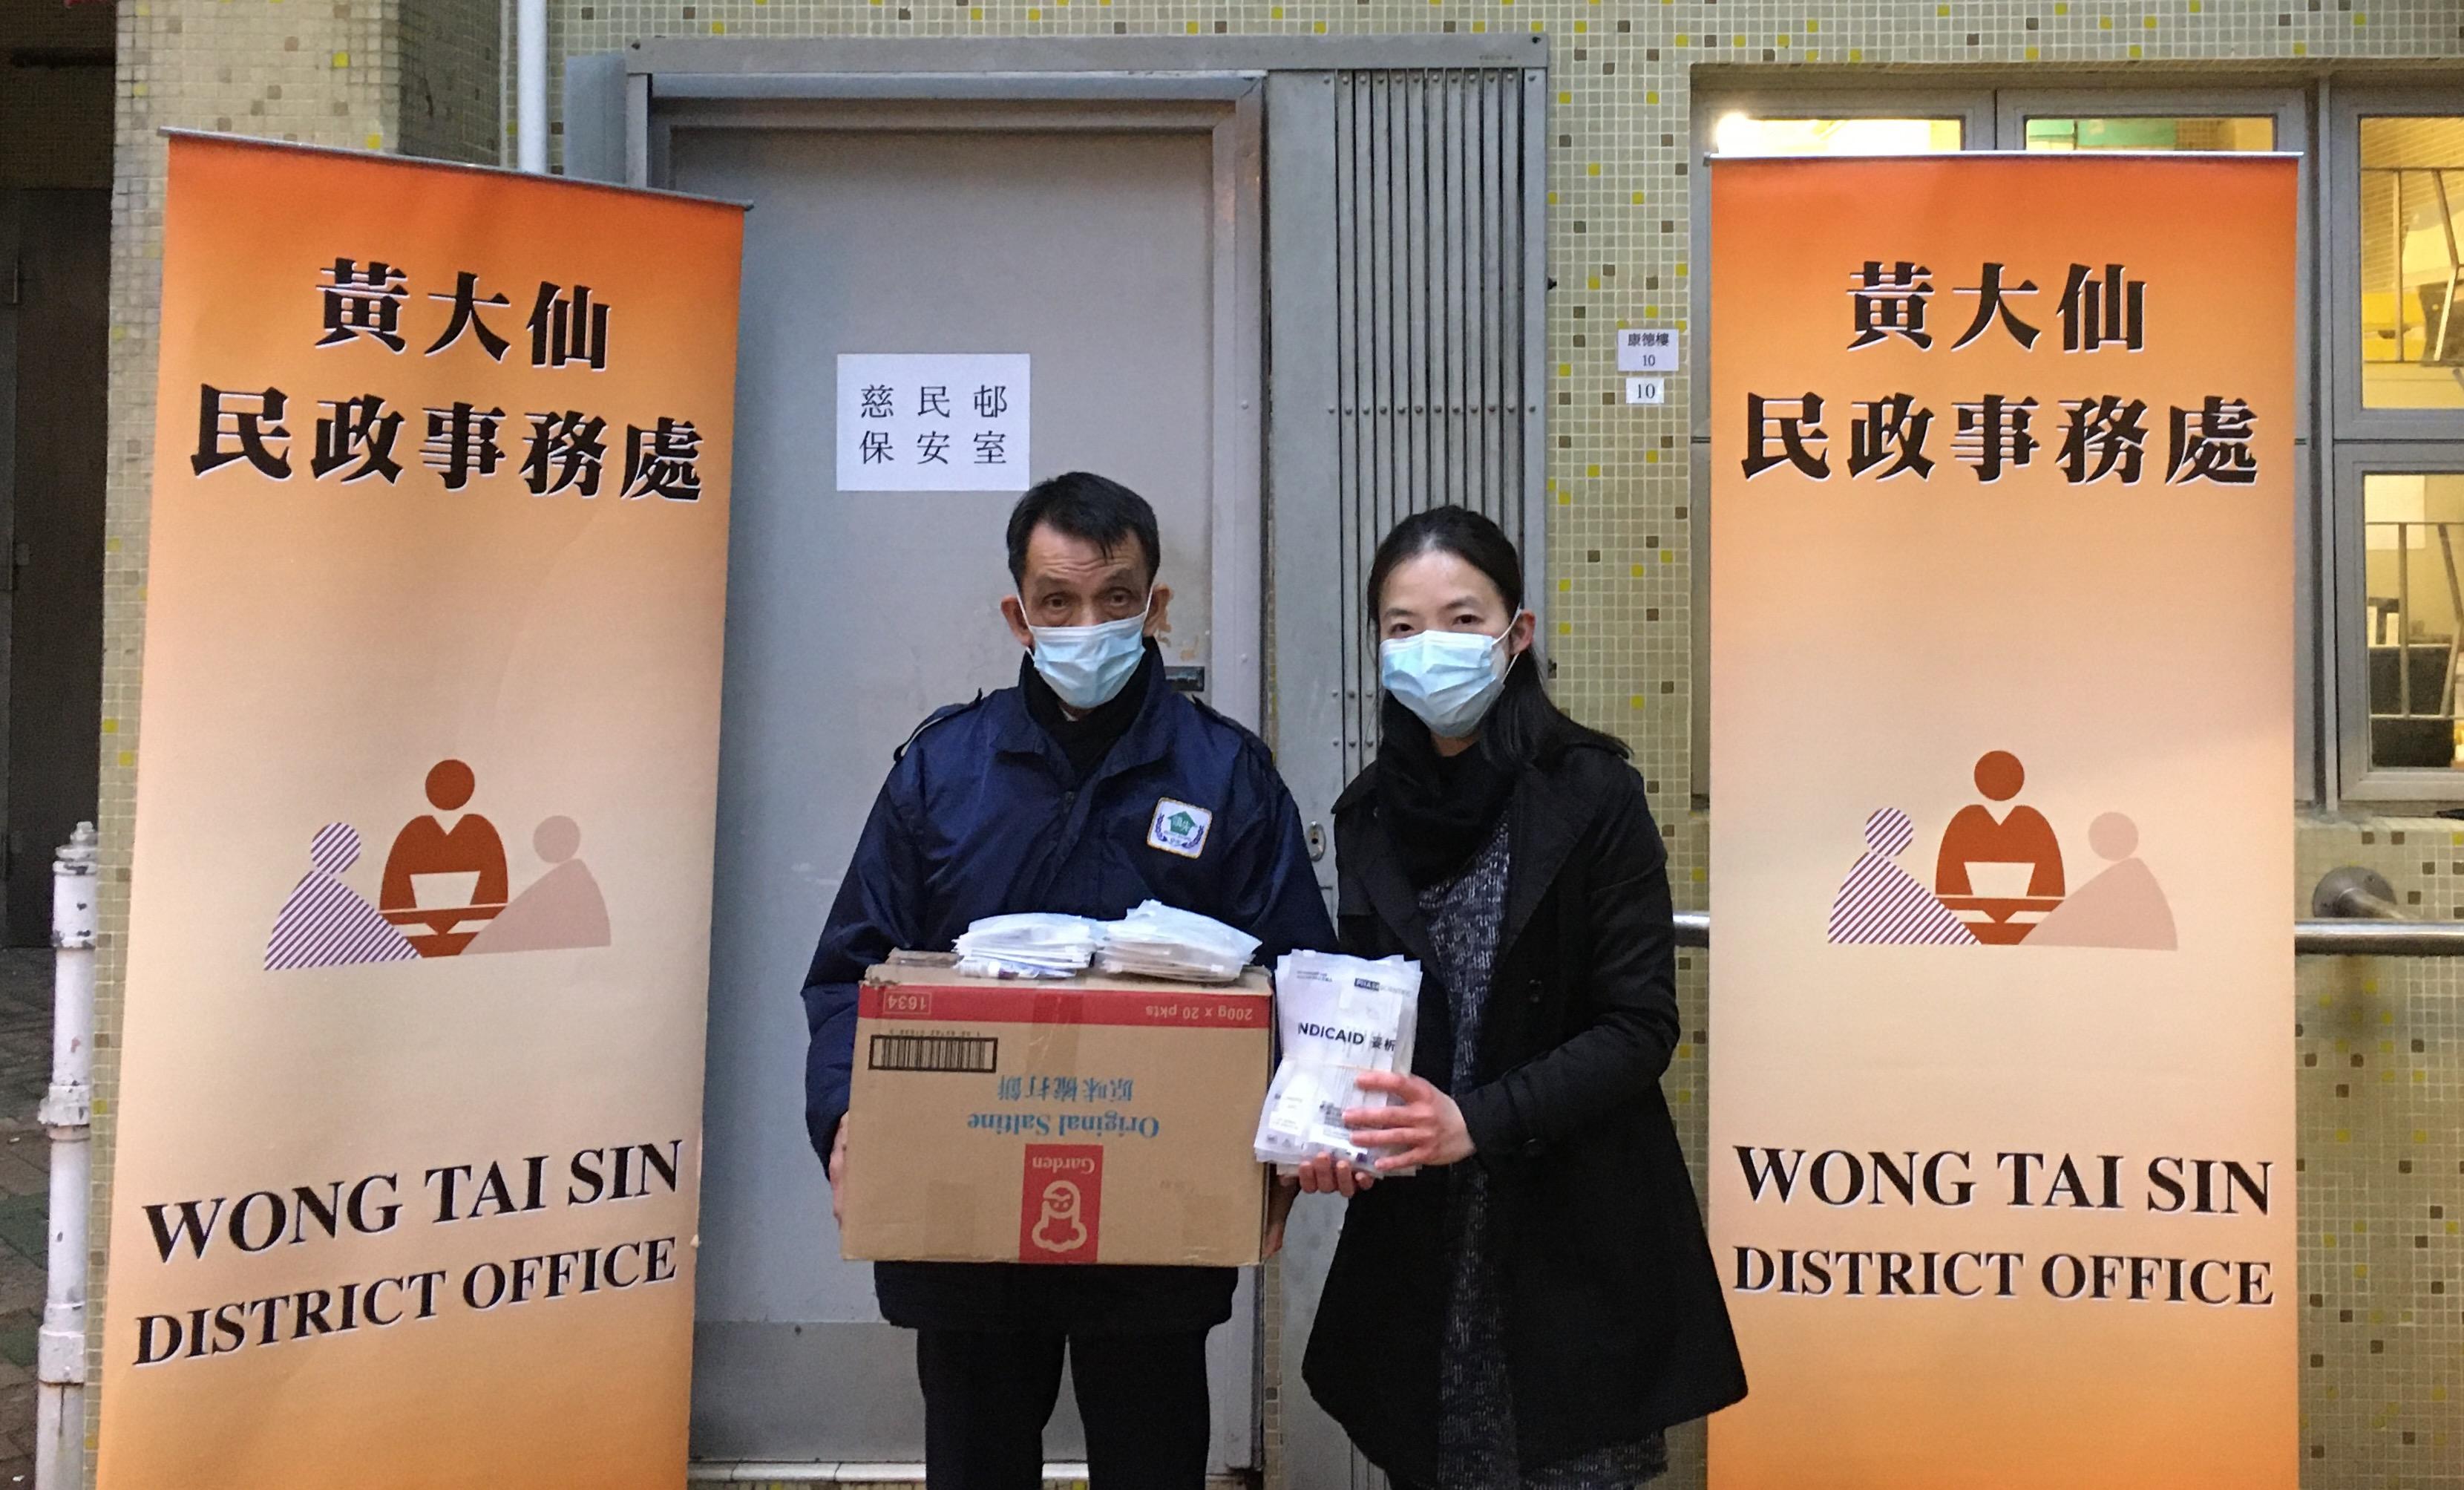 The Wong Tai Sin District Office today (February 20) distributed COVID-19 rapid test kits to cleansing workers and property management staff working in Tsz Man Estate for voluntary testing through the Estate’s property management company.